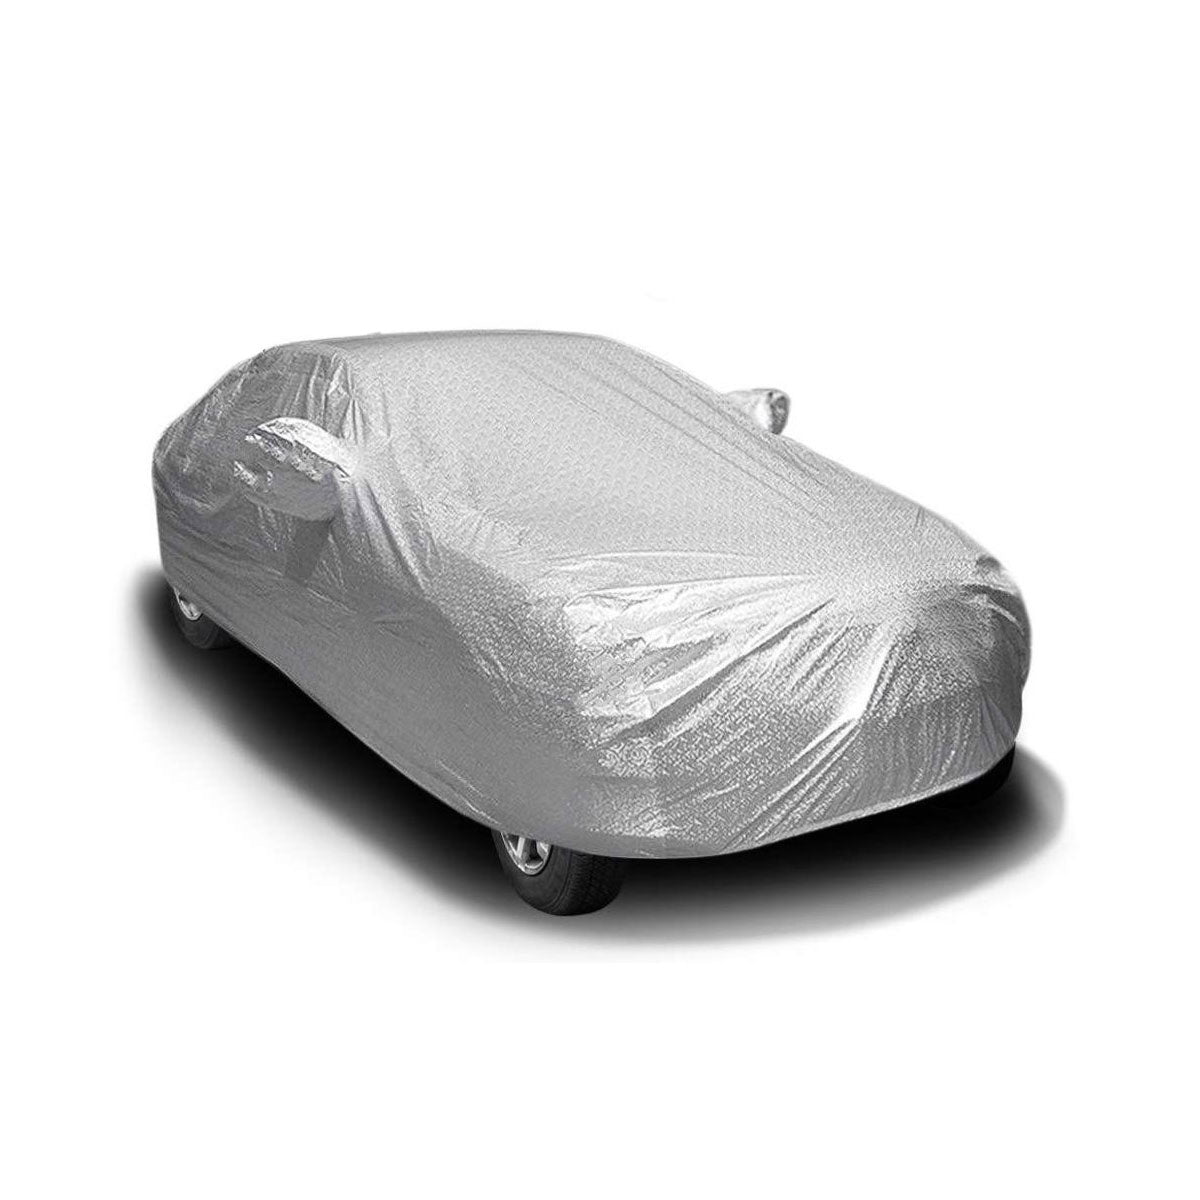 Oshotto Spyro Silver Anti Reflective, dustproof and Water Proof Car Body Cover with Mirror Pockets For Tata Vista